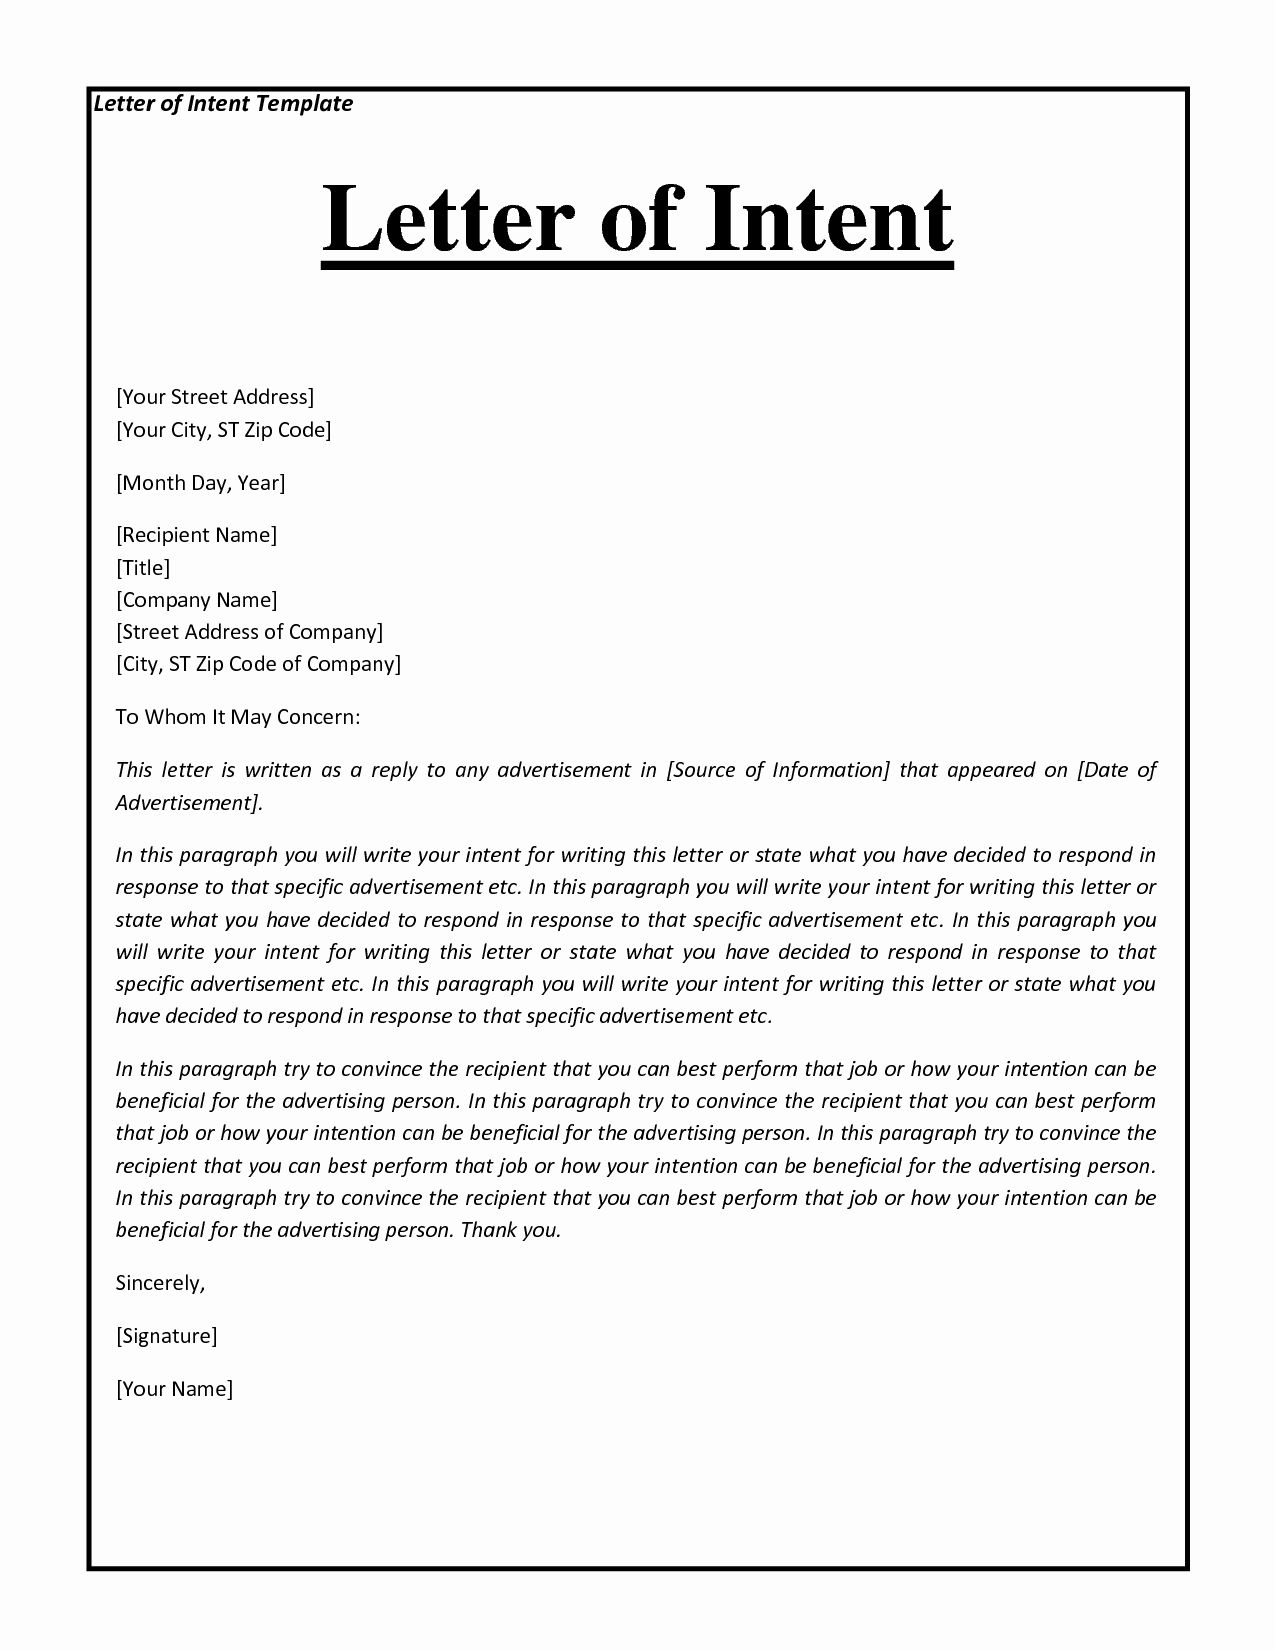 40 Writing A Letter Of Intent Letter Of Intent Lettering intended for size 1275 X 1650